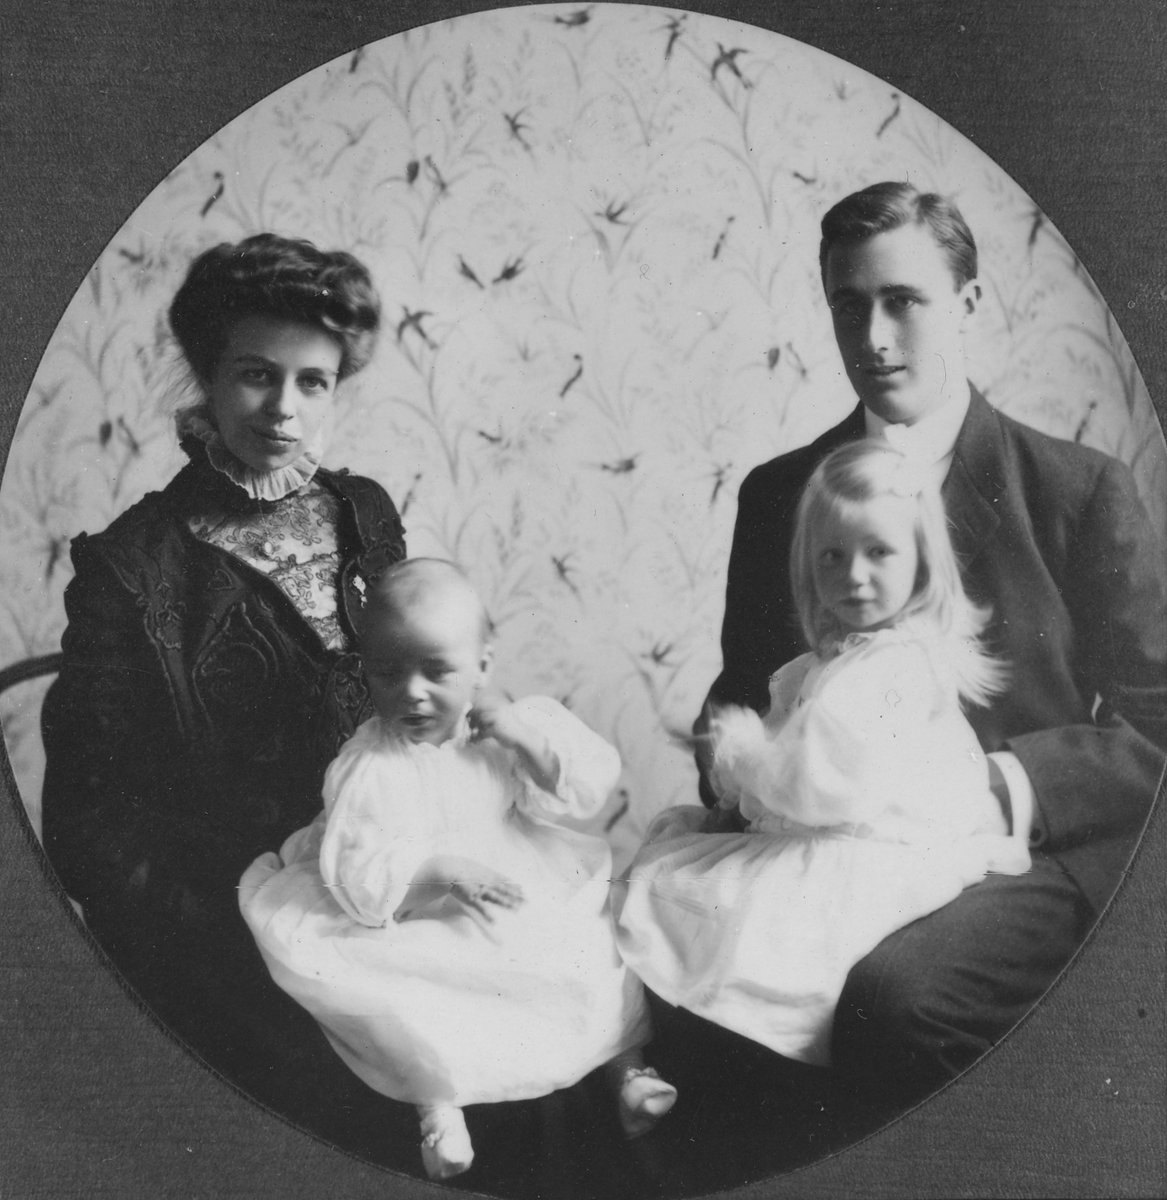 13. The central figure here is Franklin Delano Roosevelt, President of the United States 1933-1945. His wife Eleanor Roosevelt was a strongly influential First Lady, and rightly so. Here are FDR and Eleanor with their first two children, 1908.